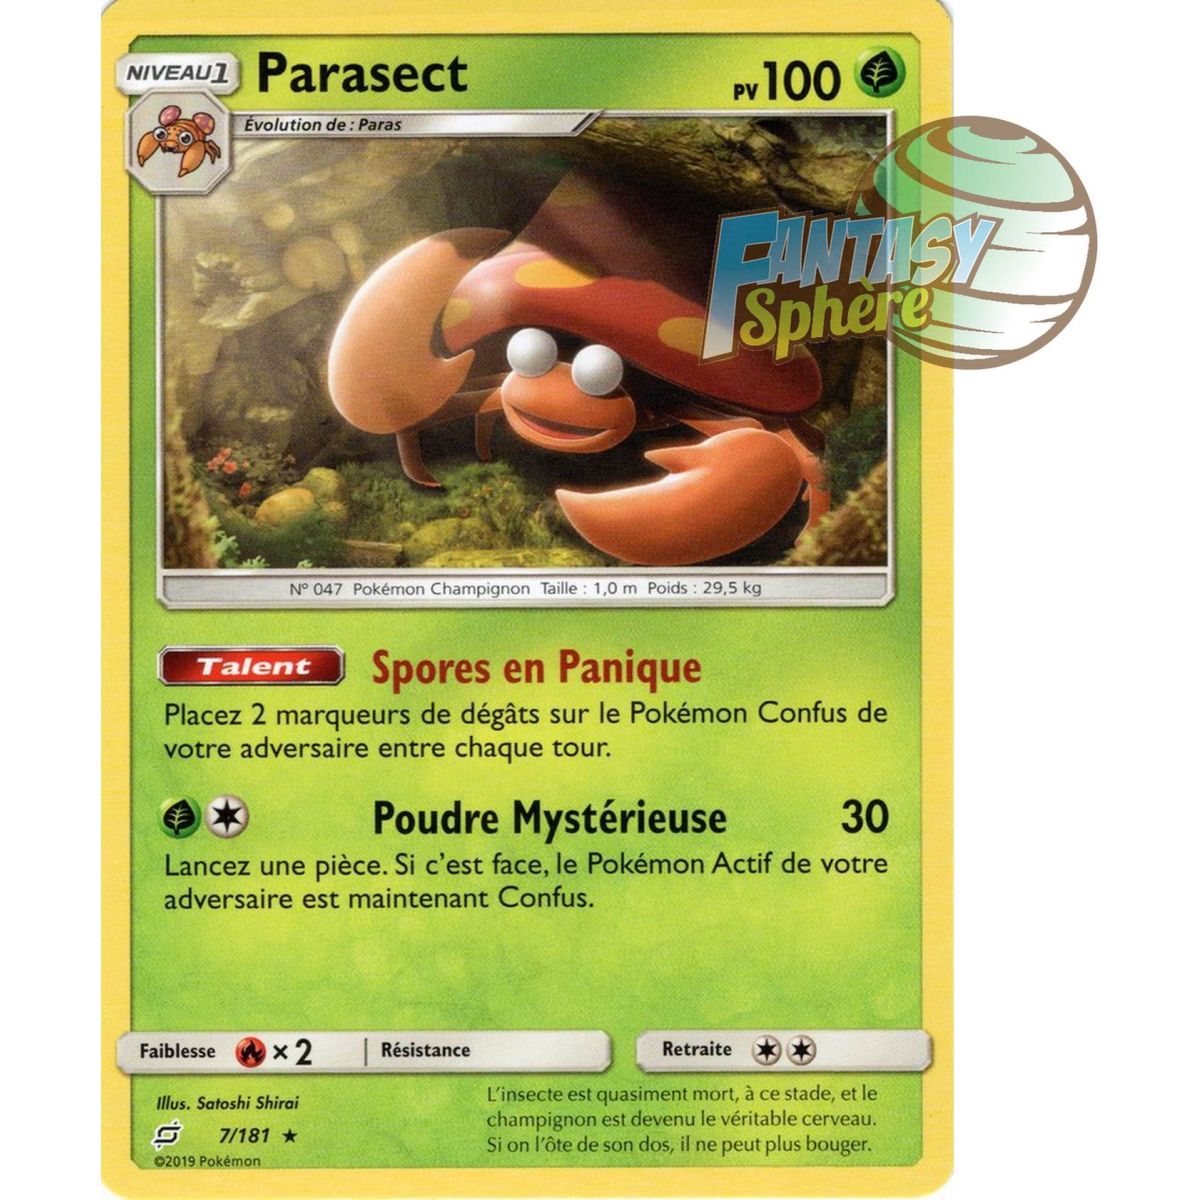 Parasect - Rare 7/181 - Sun and Moon 9 Shock Duo